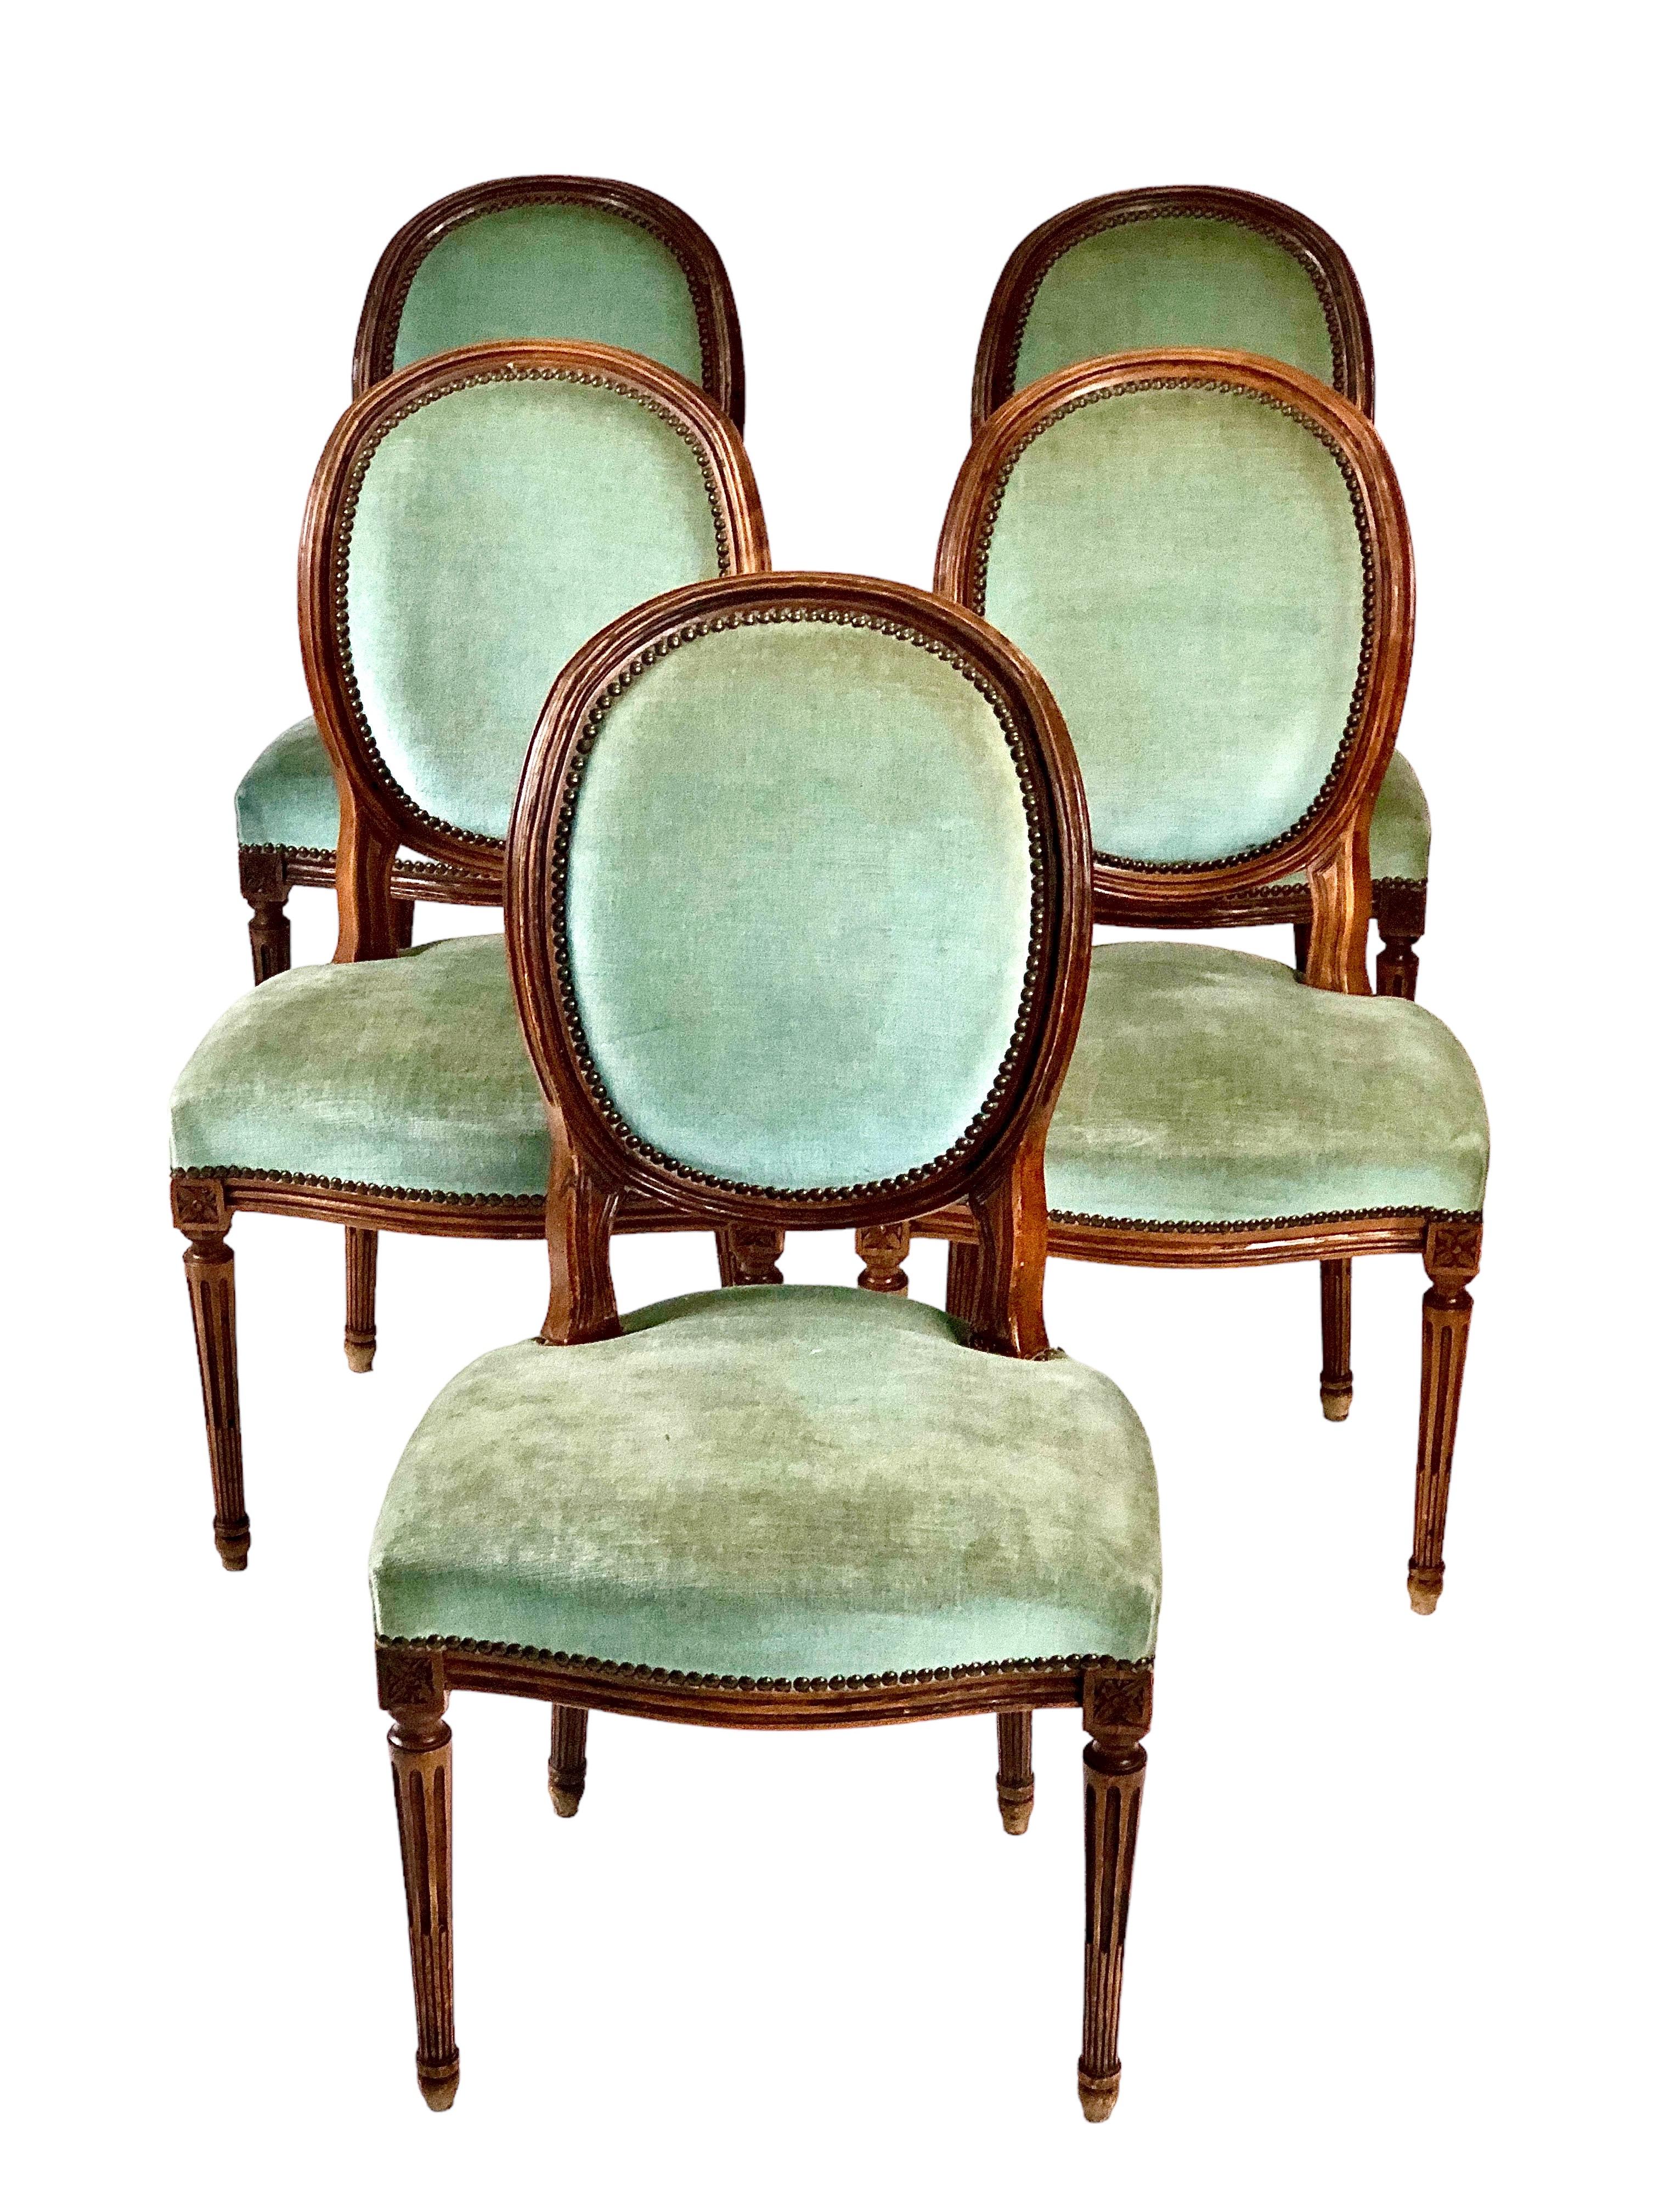 This set of five Parisian dining chairs is truly stunning. Made of solid chestnut, they boast upholstery in rich blue velvet. Each chair is designed to offer exceptional comfort, with a padded and contoured seatback embellished with elegant nailhead